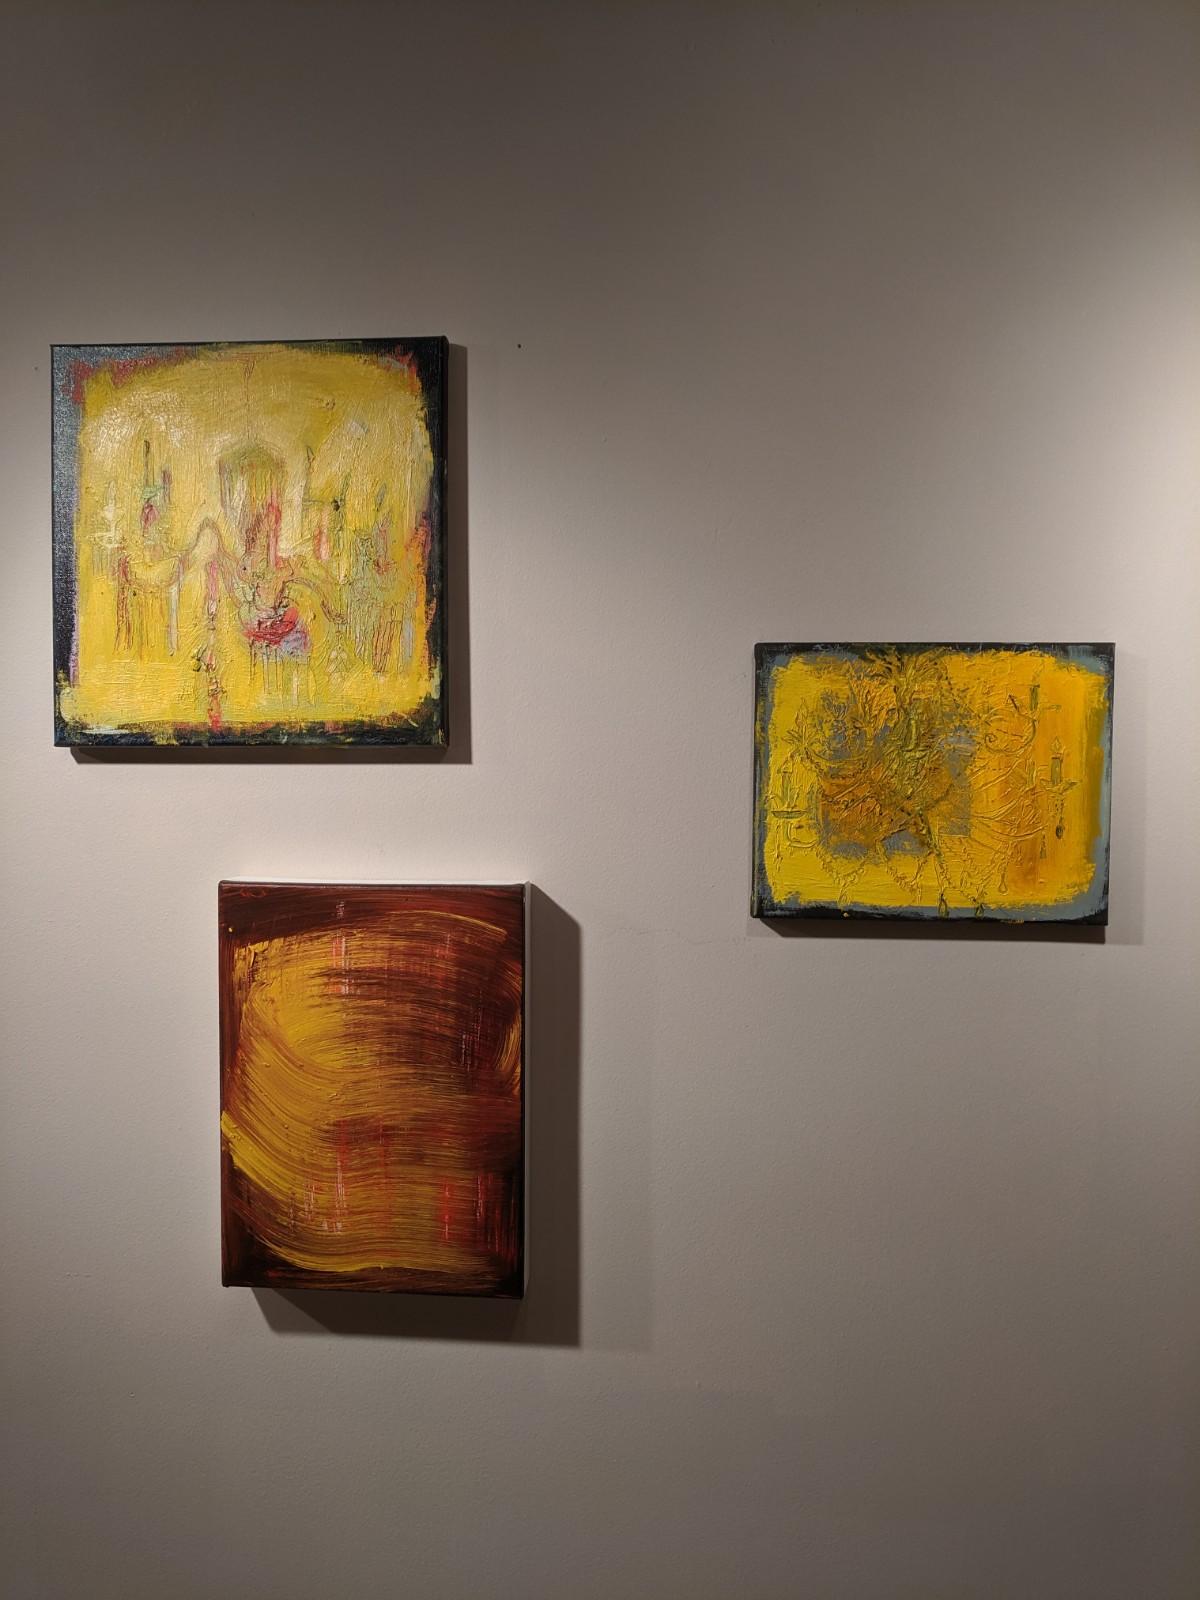 Born in Queens, NY to a family of artists, inventors and actors, Lizbeth Mitty grew up painting and writing. Her work has been exhibited in galleries and museums in both the United States and abroad and is held in public and private collections